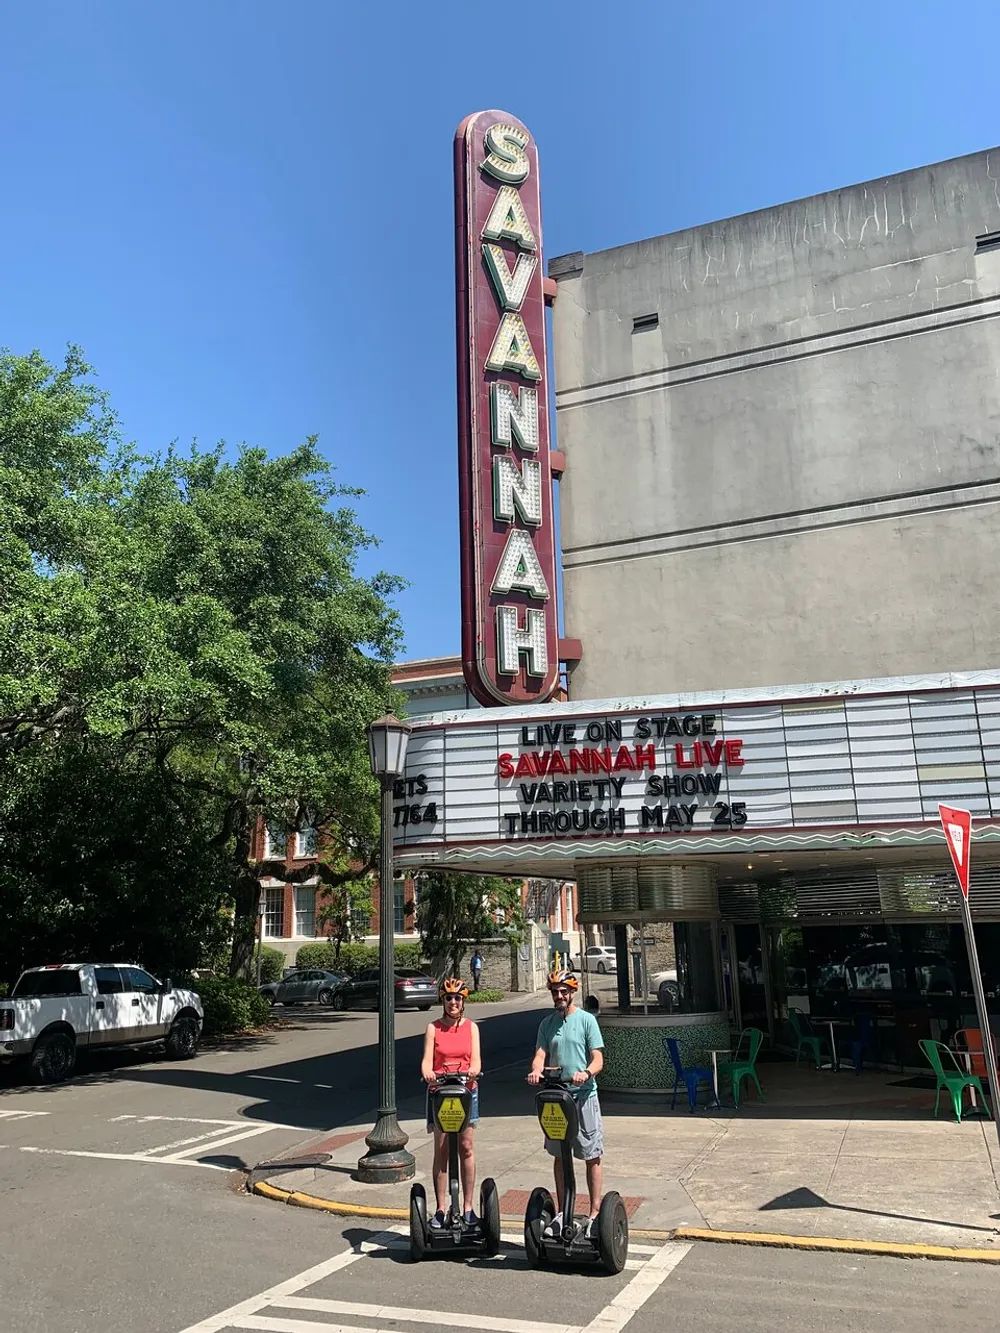 Two people are riding Segways in front of the historic Savannah Theater with a luminescent sign under a clear blue sky